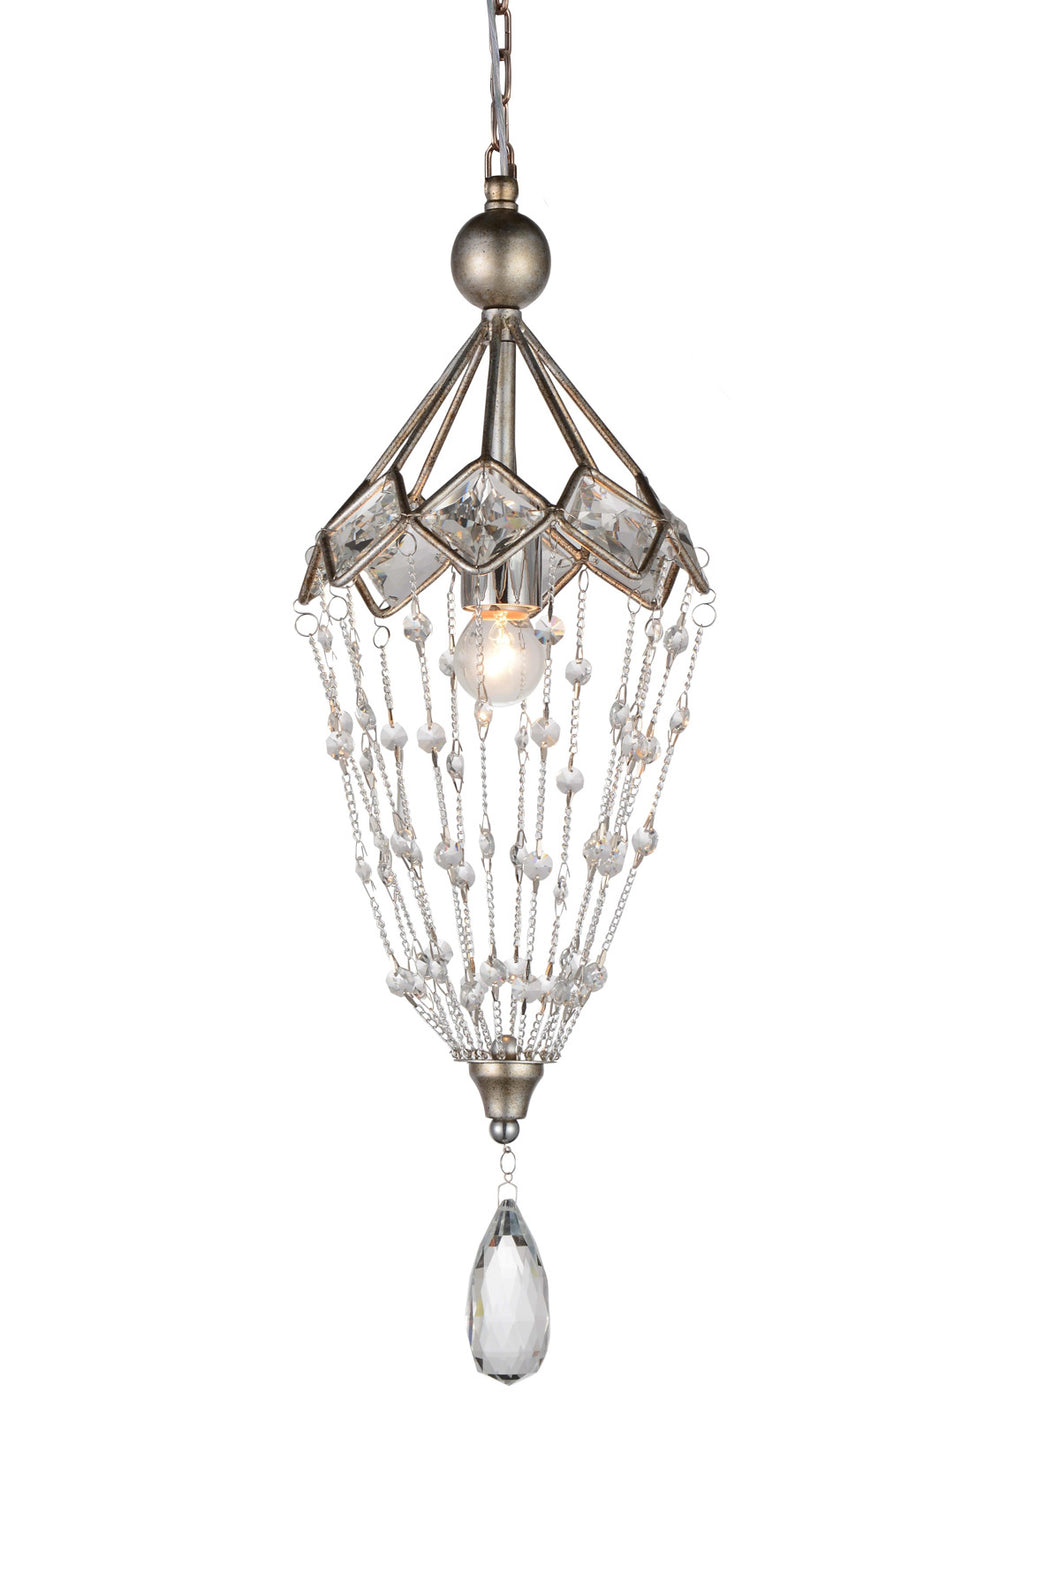 1 Light Down Mini Chandelier with Speckled Nickel finish